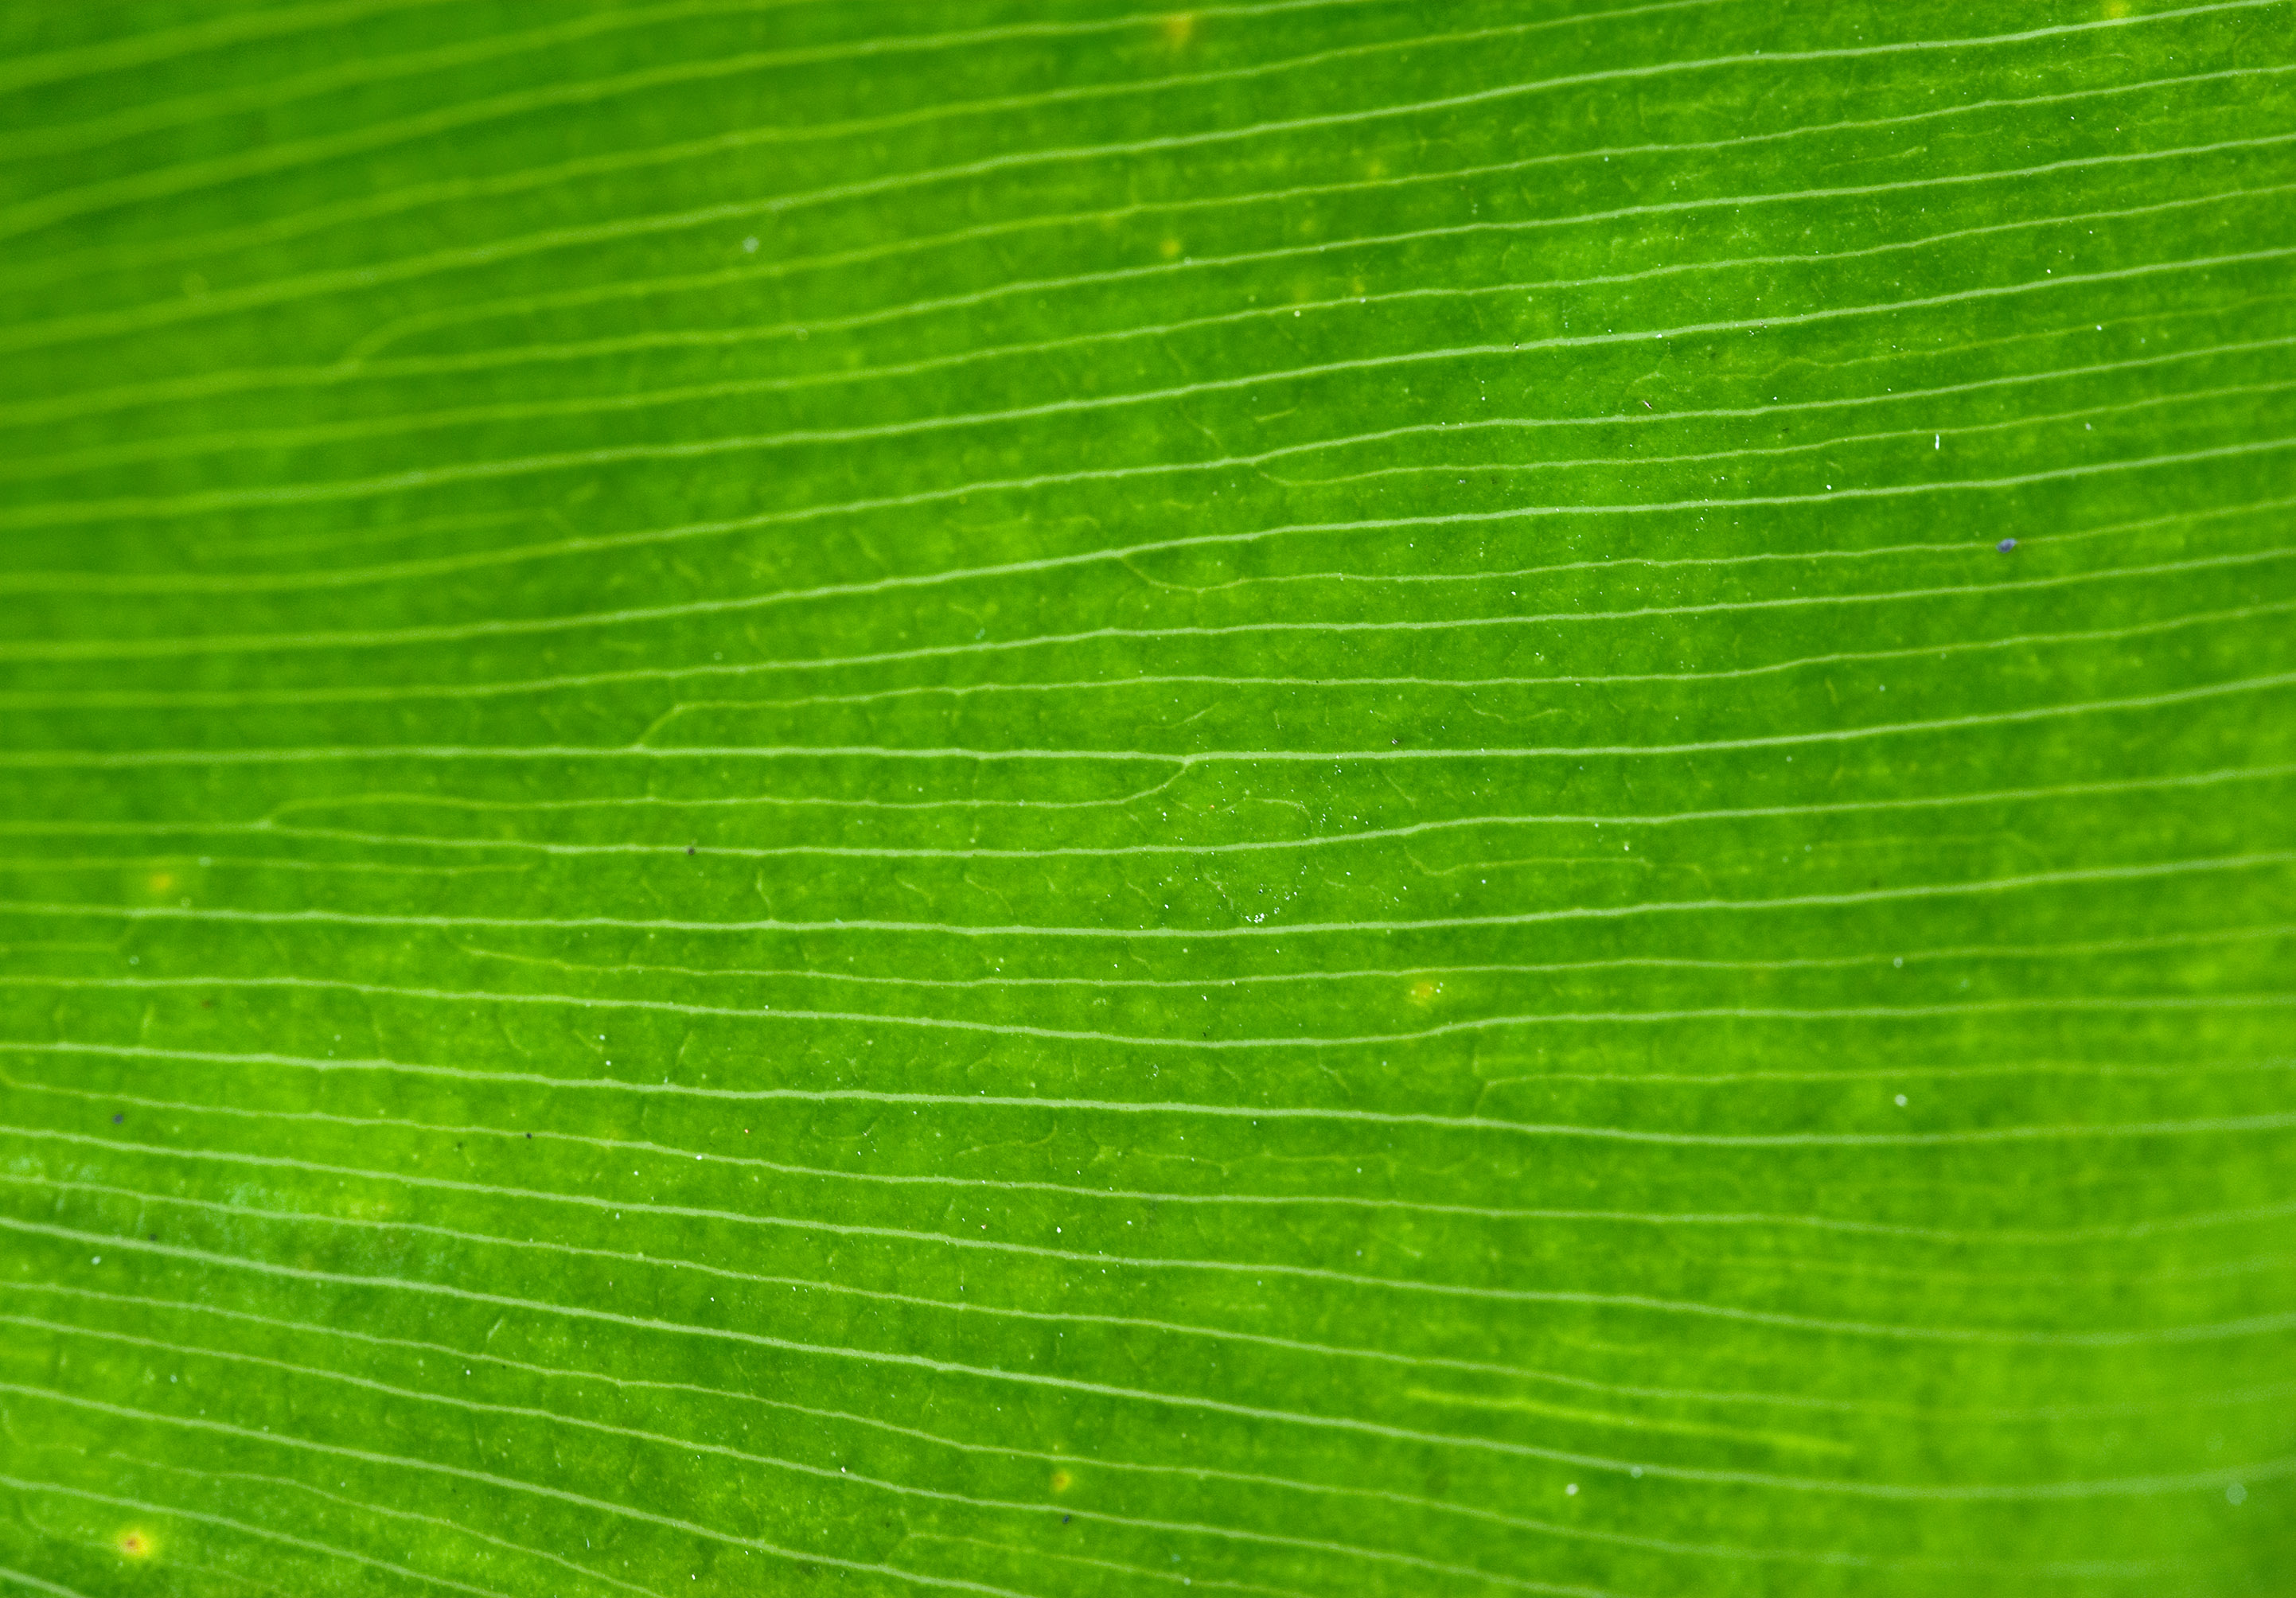 leaf green, texture, photo, background, download, green leaf texture